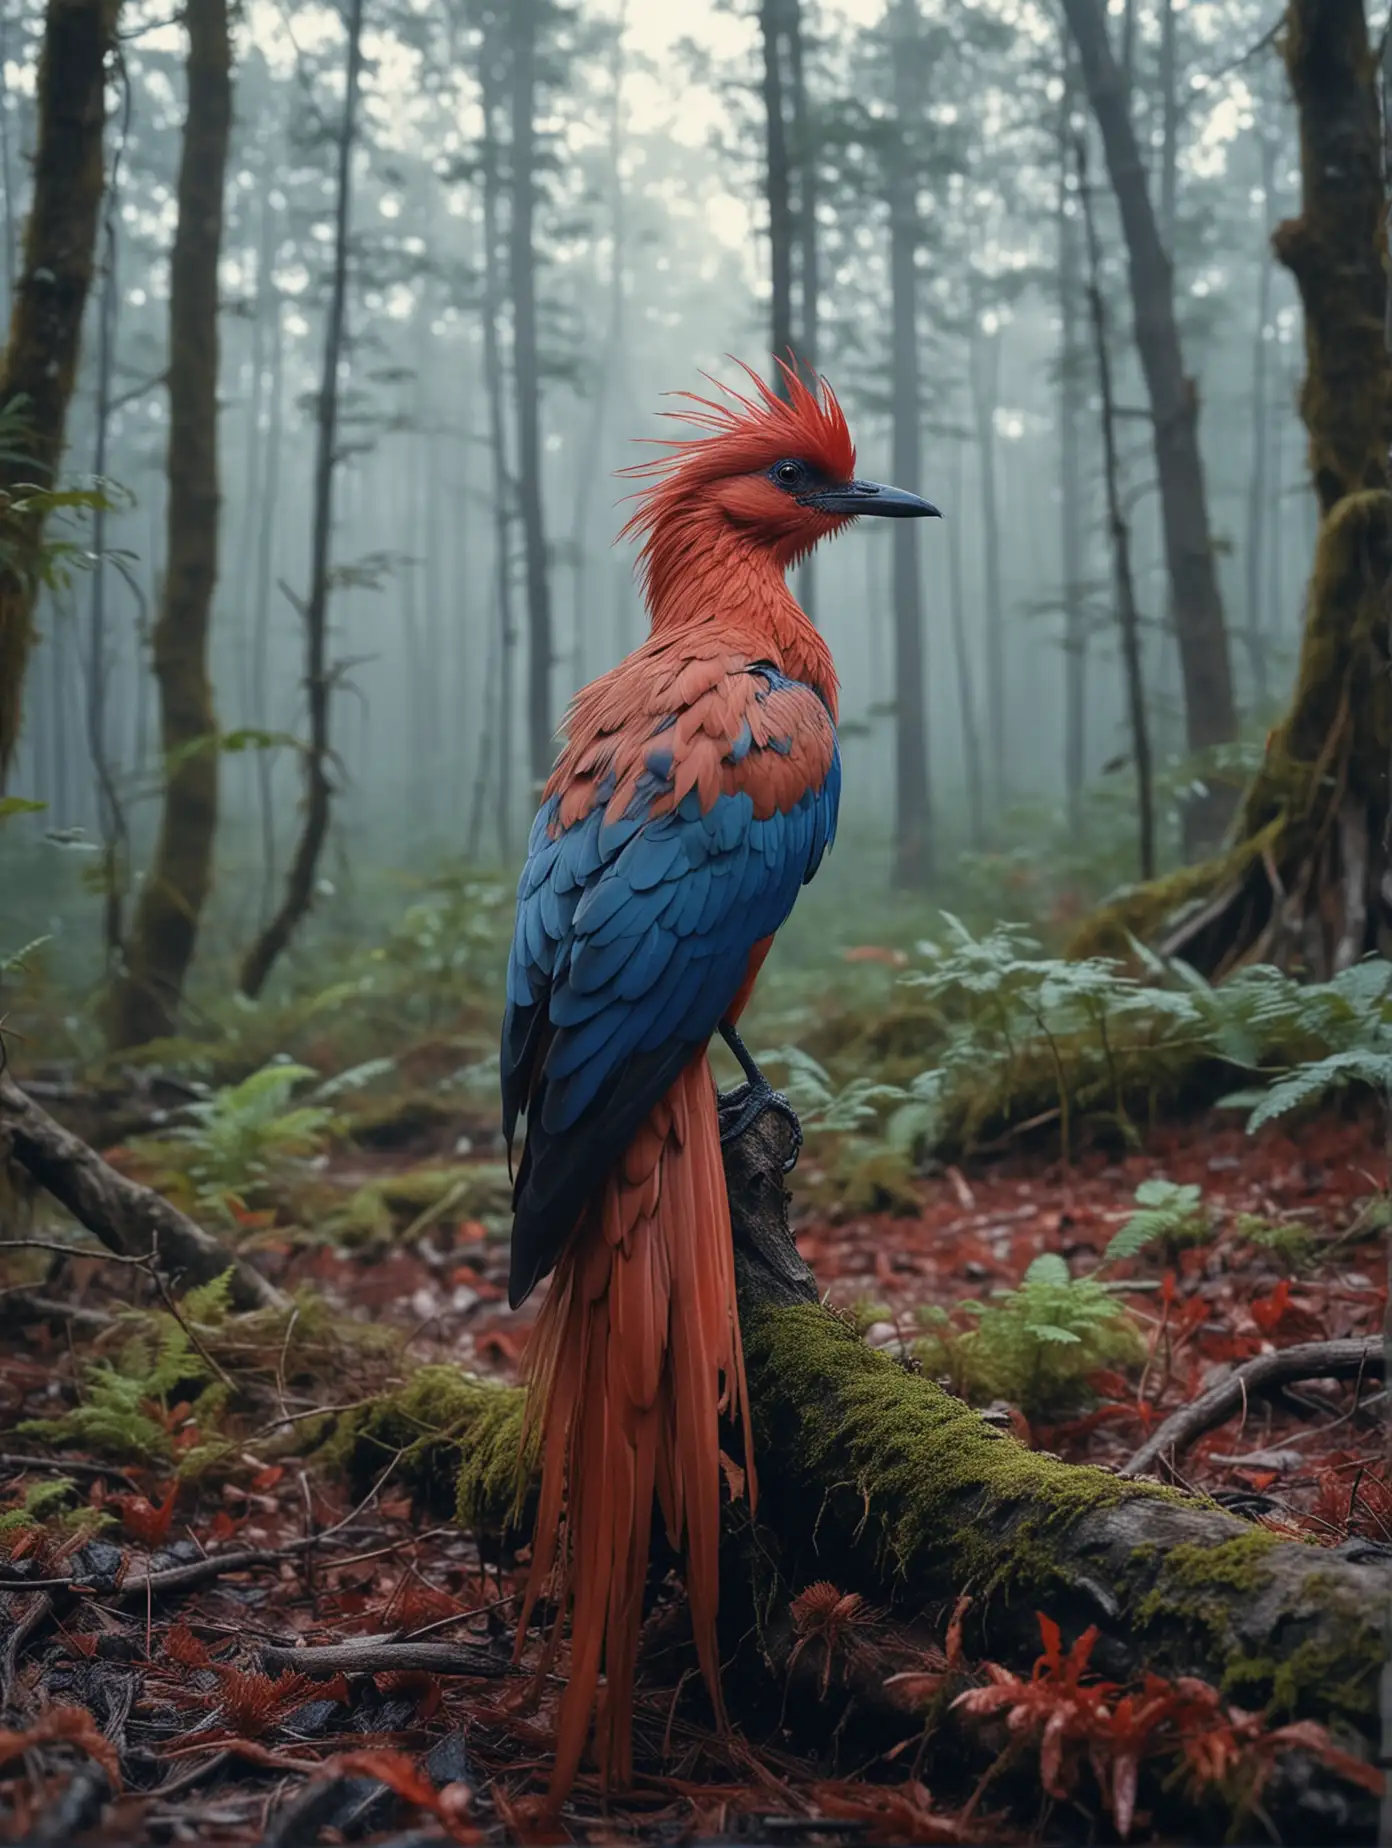 Colorful Bird with Long Blue Wings and Red Tail Resting in Forest Twilight